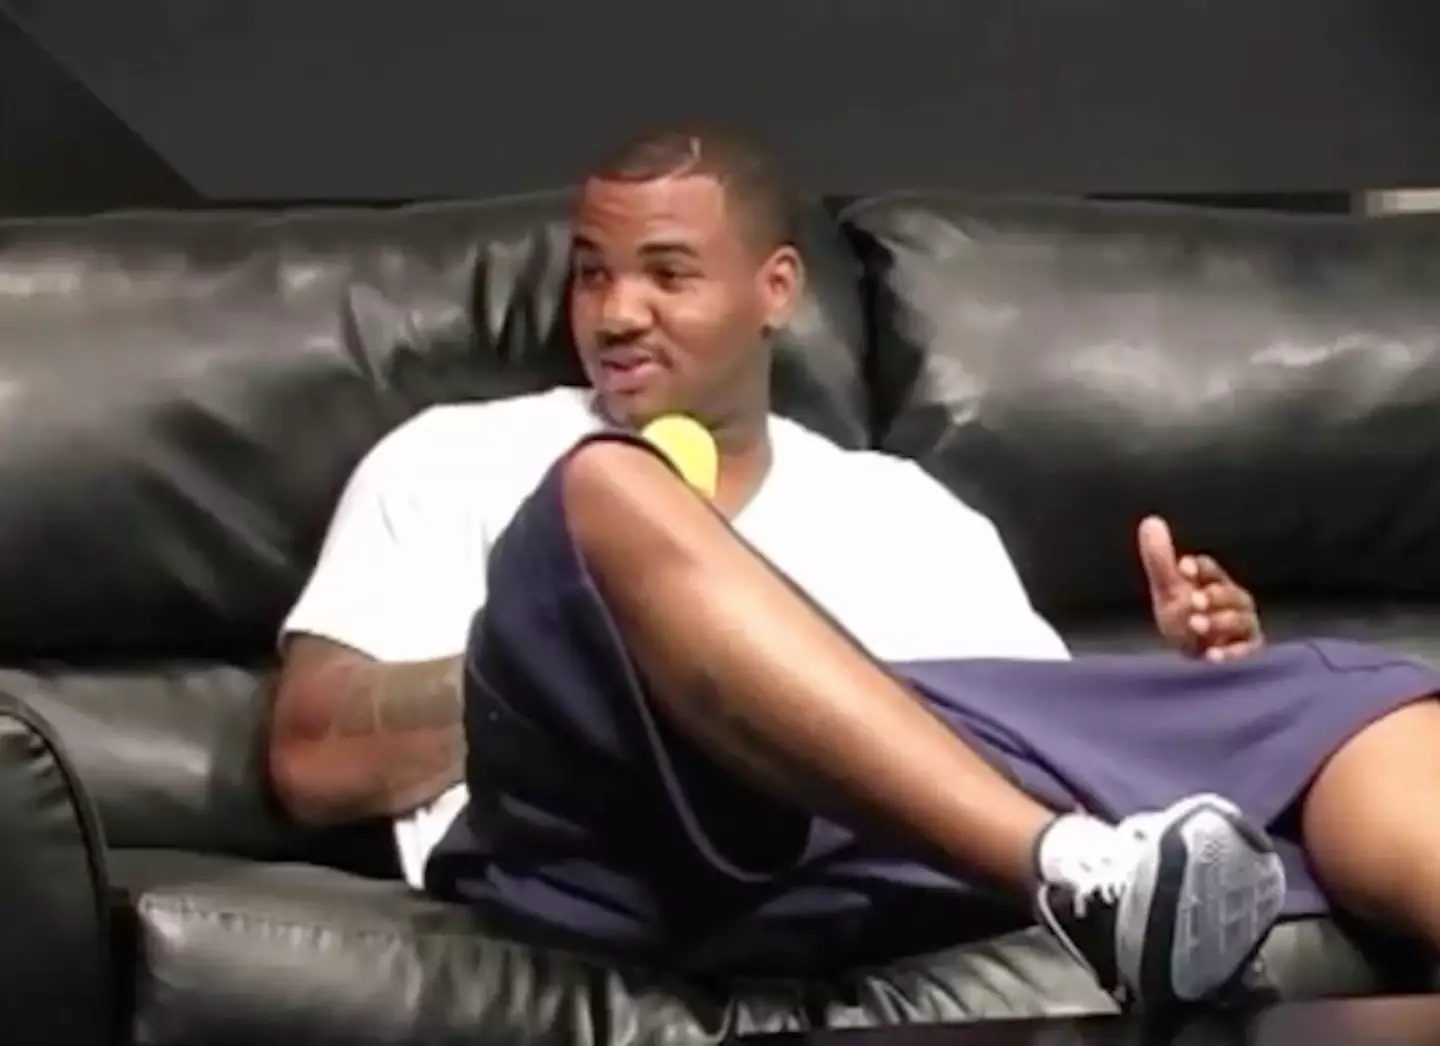 The Game hyping Eminem up in an unearthed interview.